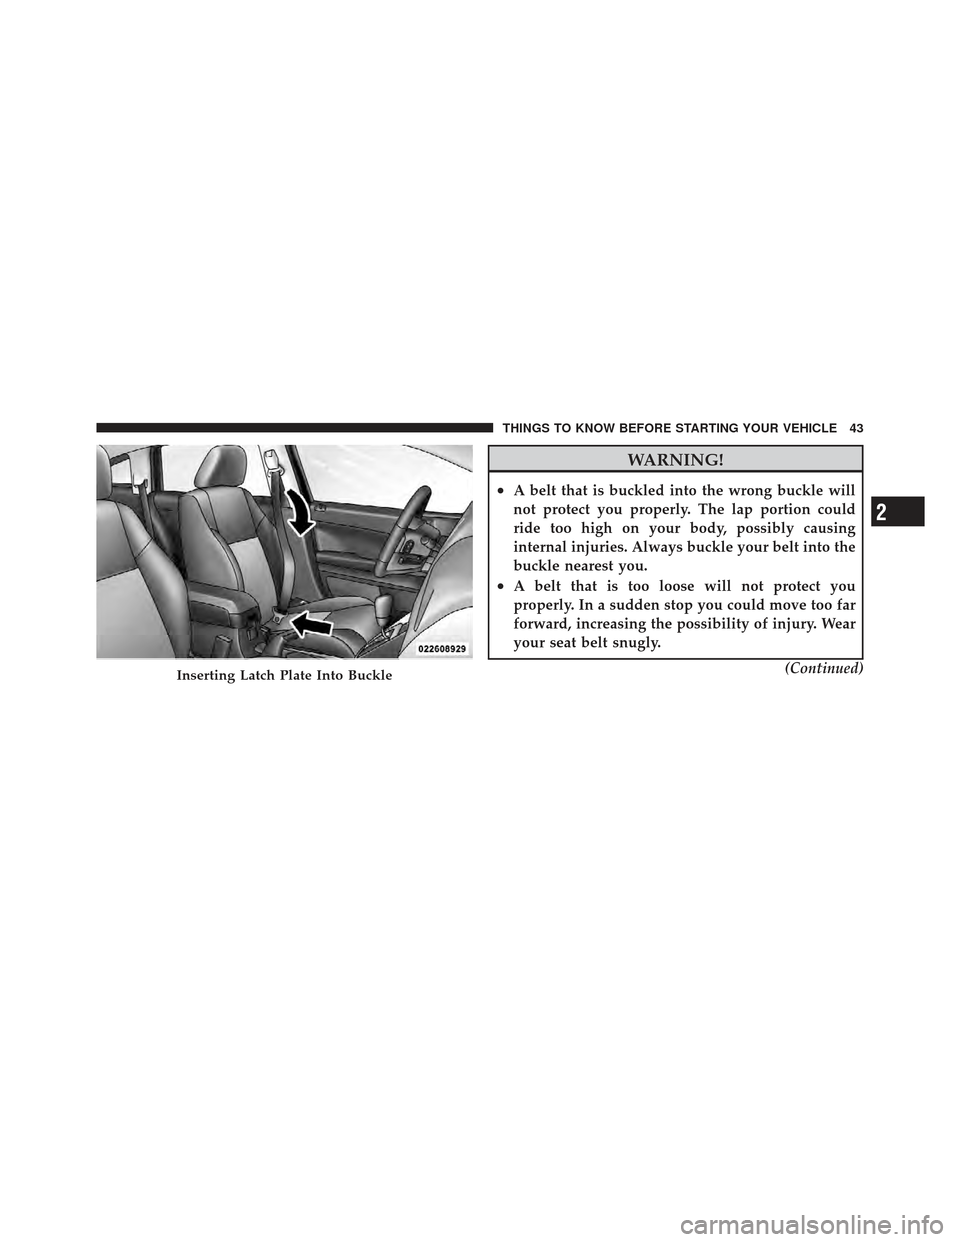 DODGE CALIBER 2011 1.G User Guide WARNING!
•A belt that is buckled into the wrong buckle will
not protect you properly. The lap portion could
ride too high on your body, possibly causing
internal injuries. Always buckle your belt in